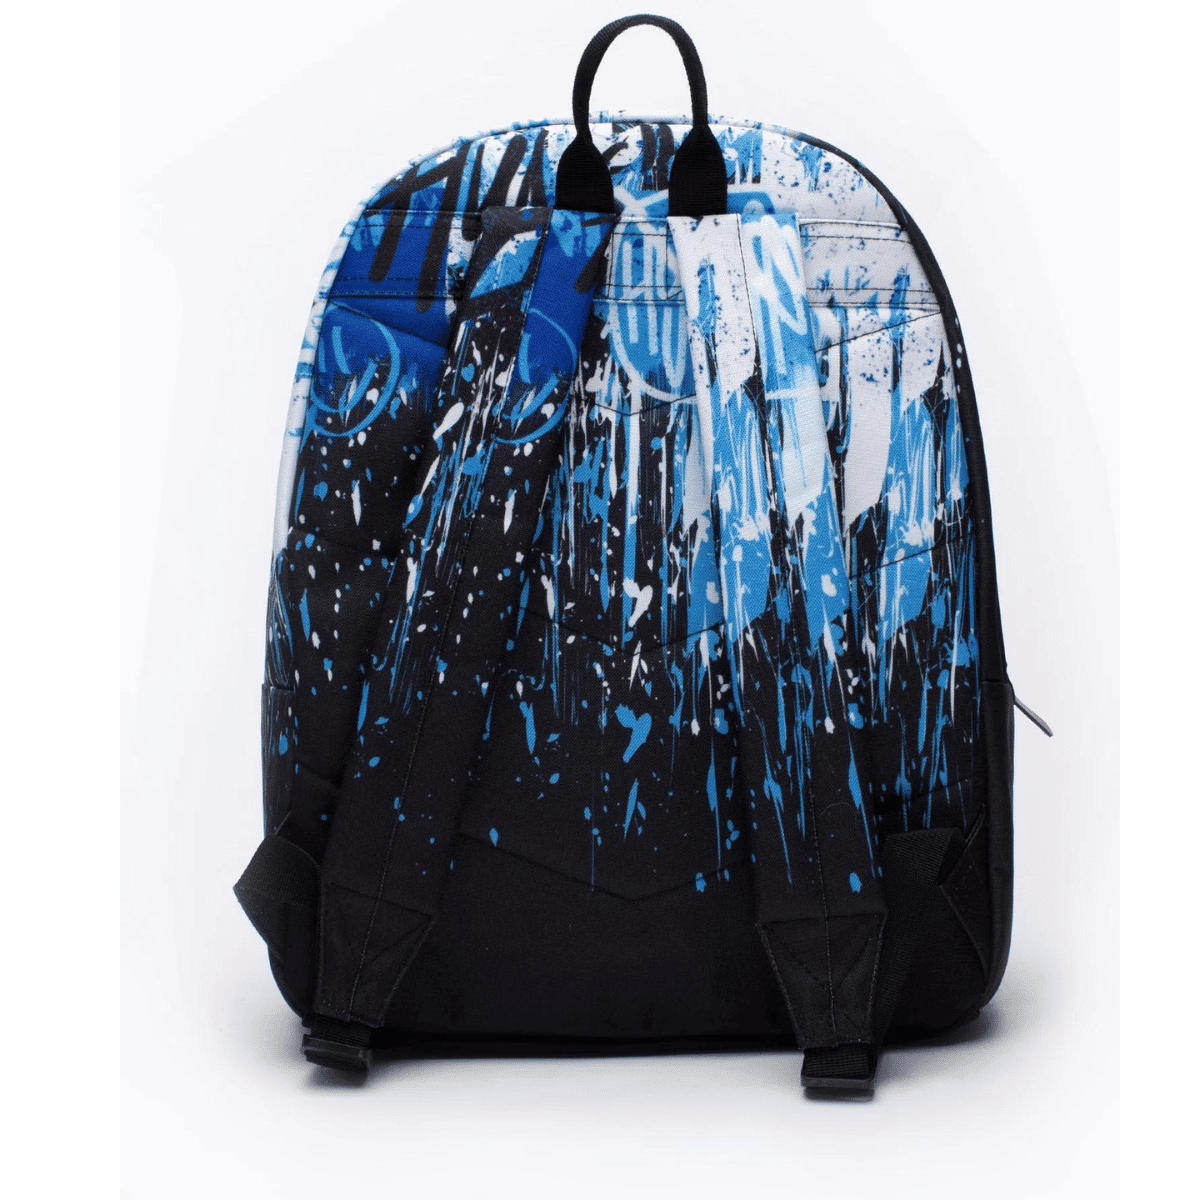 hype rucksack with blue and white graffiti design back view